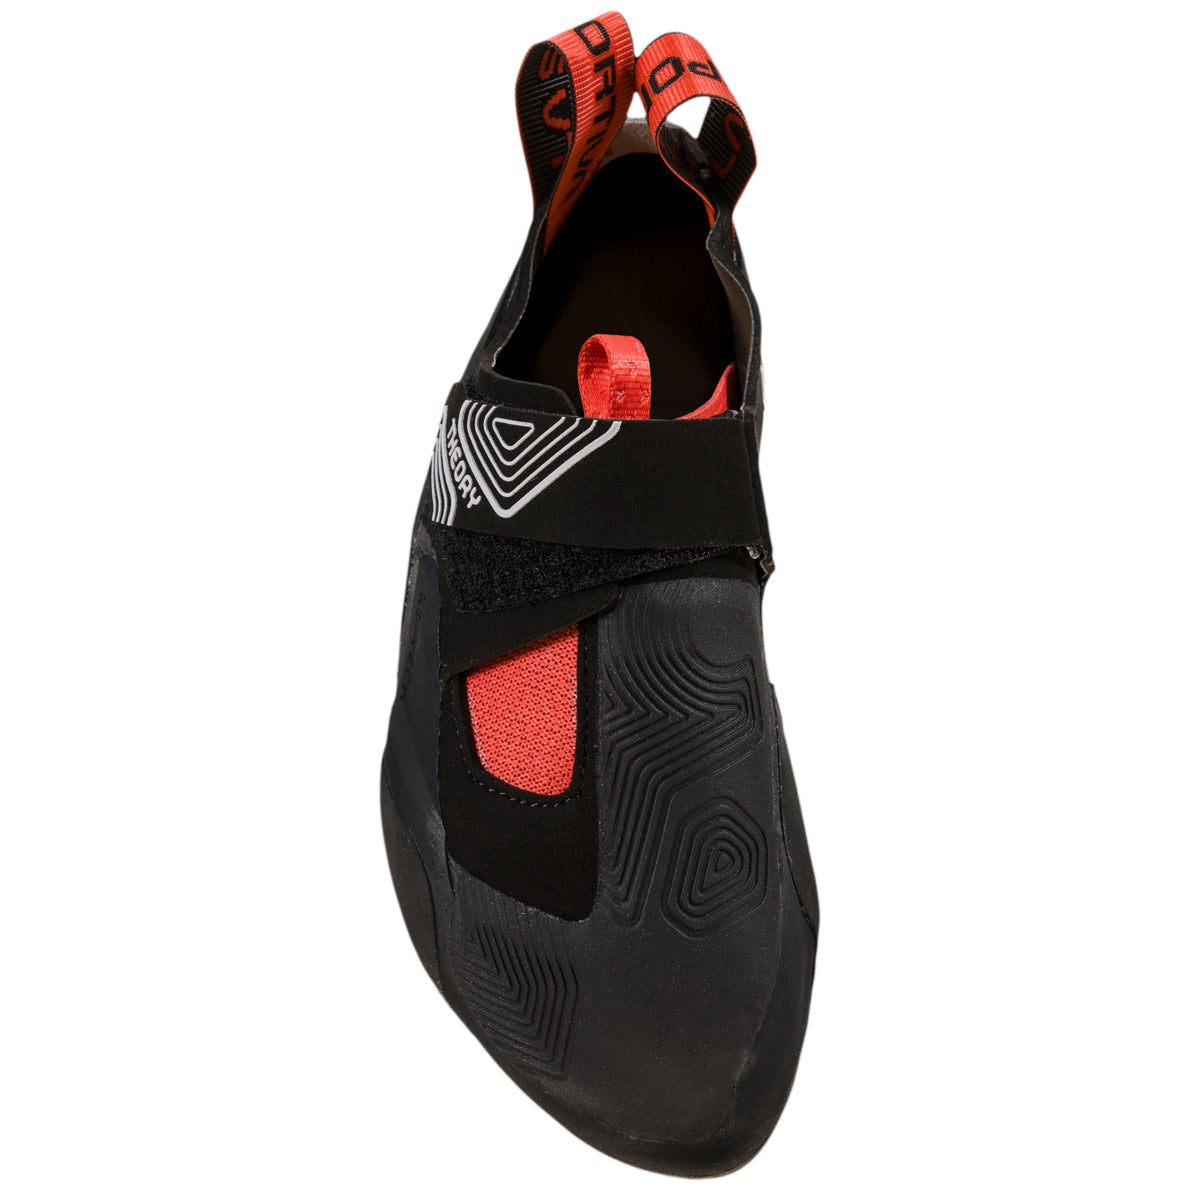 La Sportiva Theory Womens in black and red showing toe box